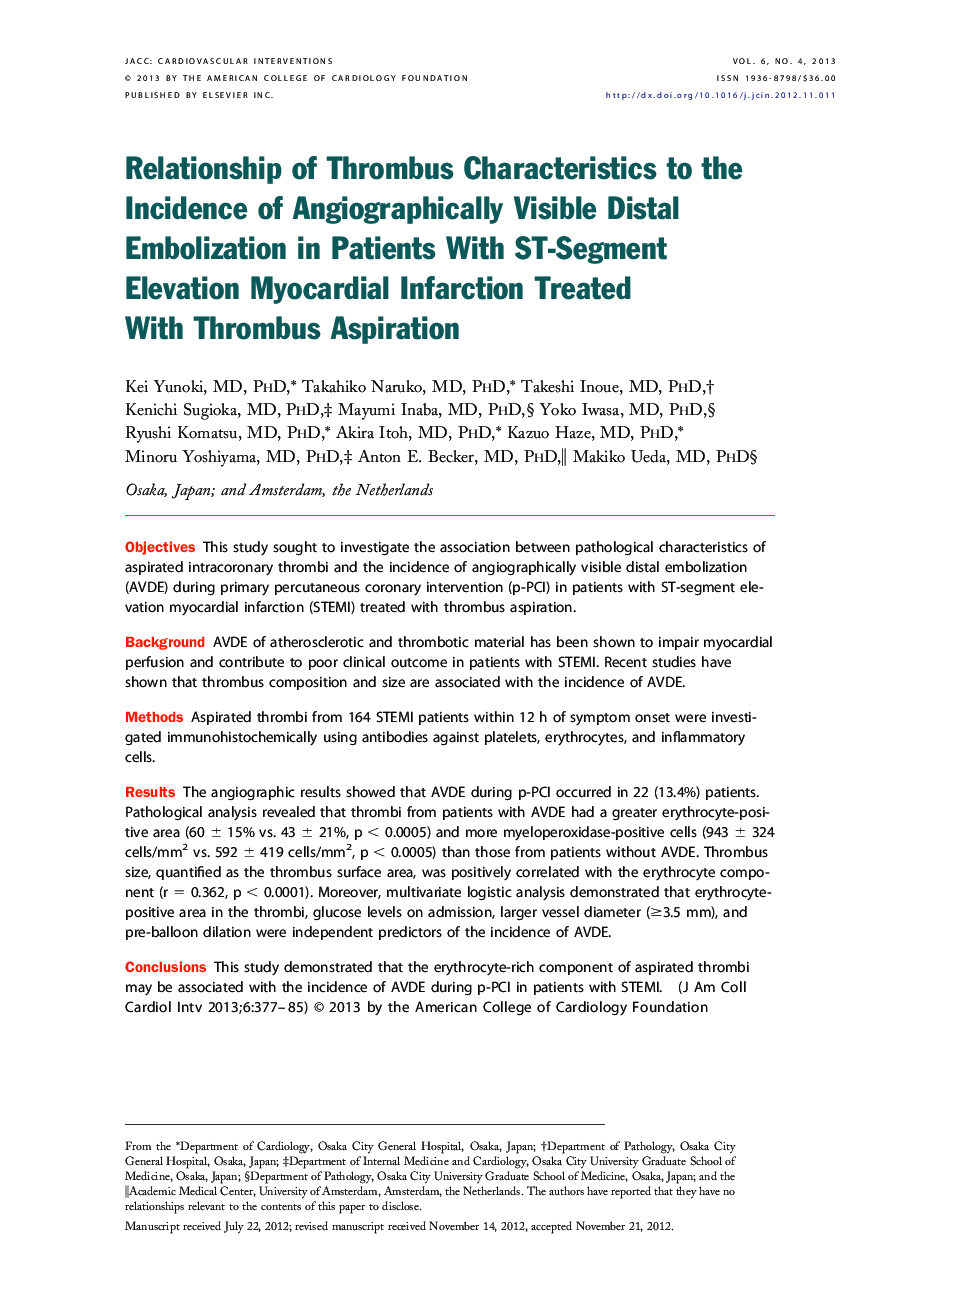 Relationship of Thrombus Characteristics to the Incidence of Angiographically Visible Distal Embolization in Patients With ST-Segment Elevation Myocardial Infarction Treated With Thrombus Aspiration 